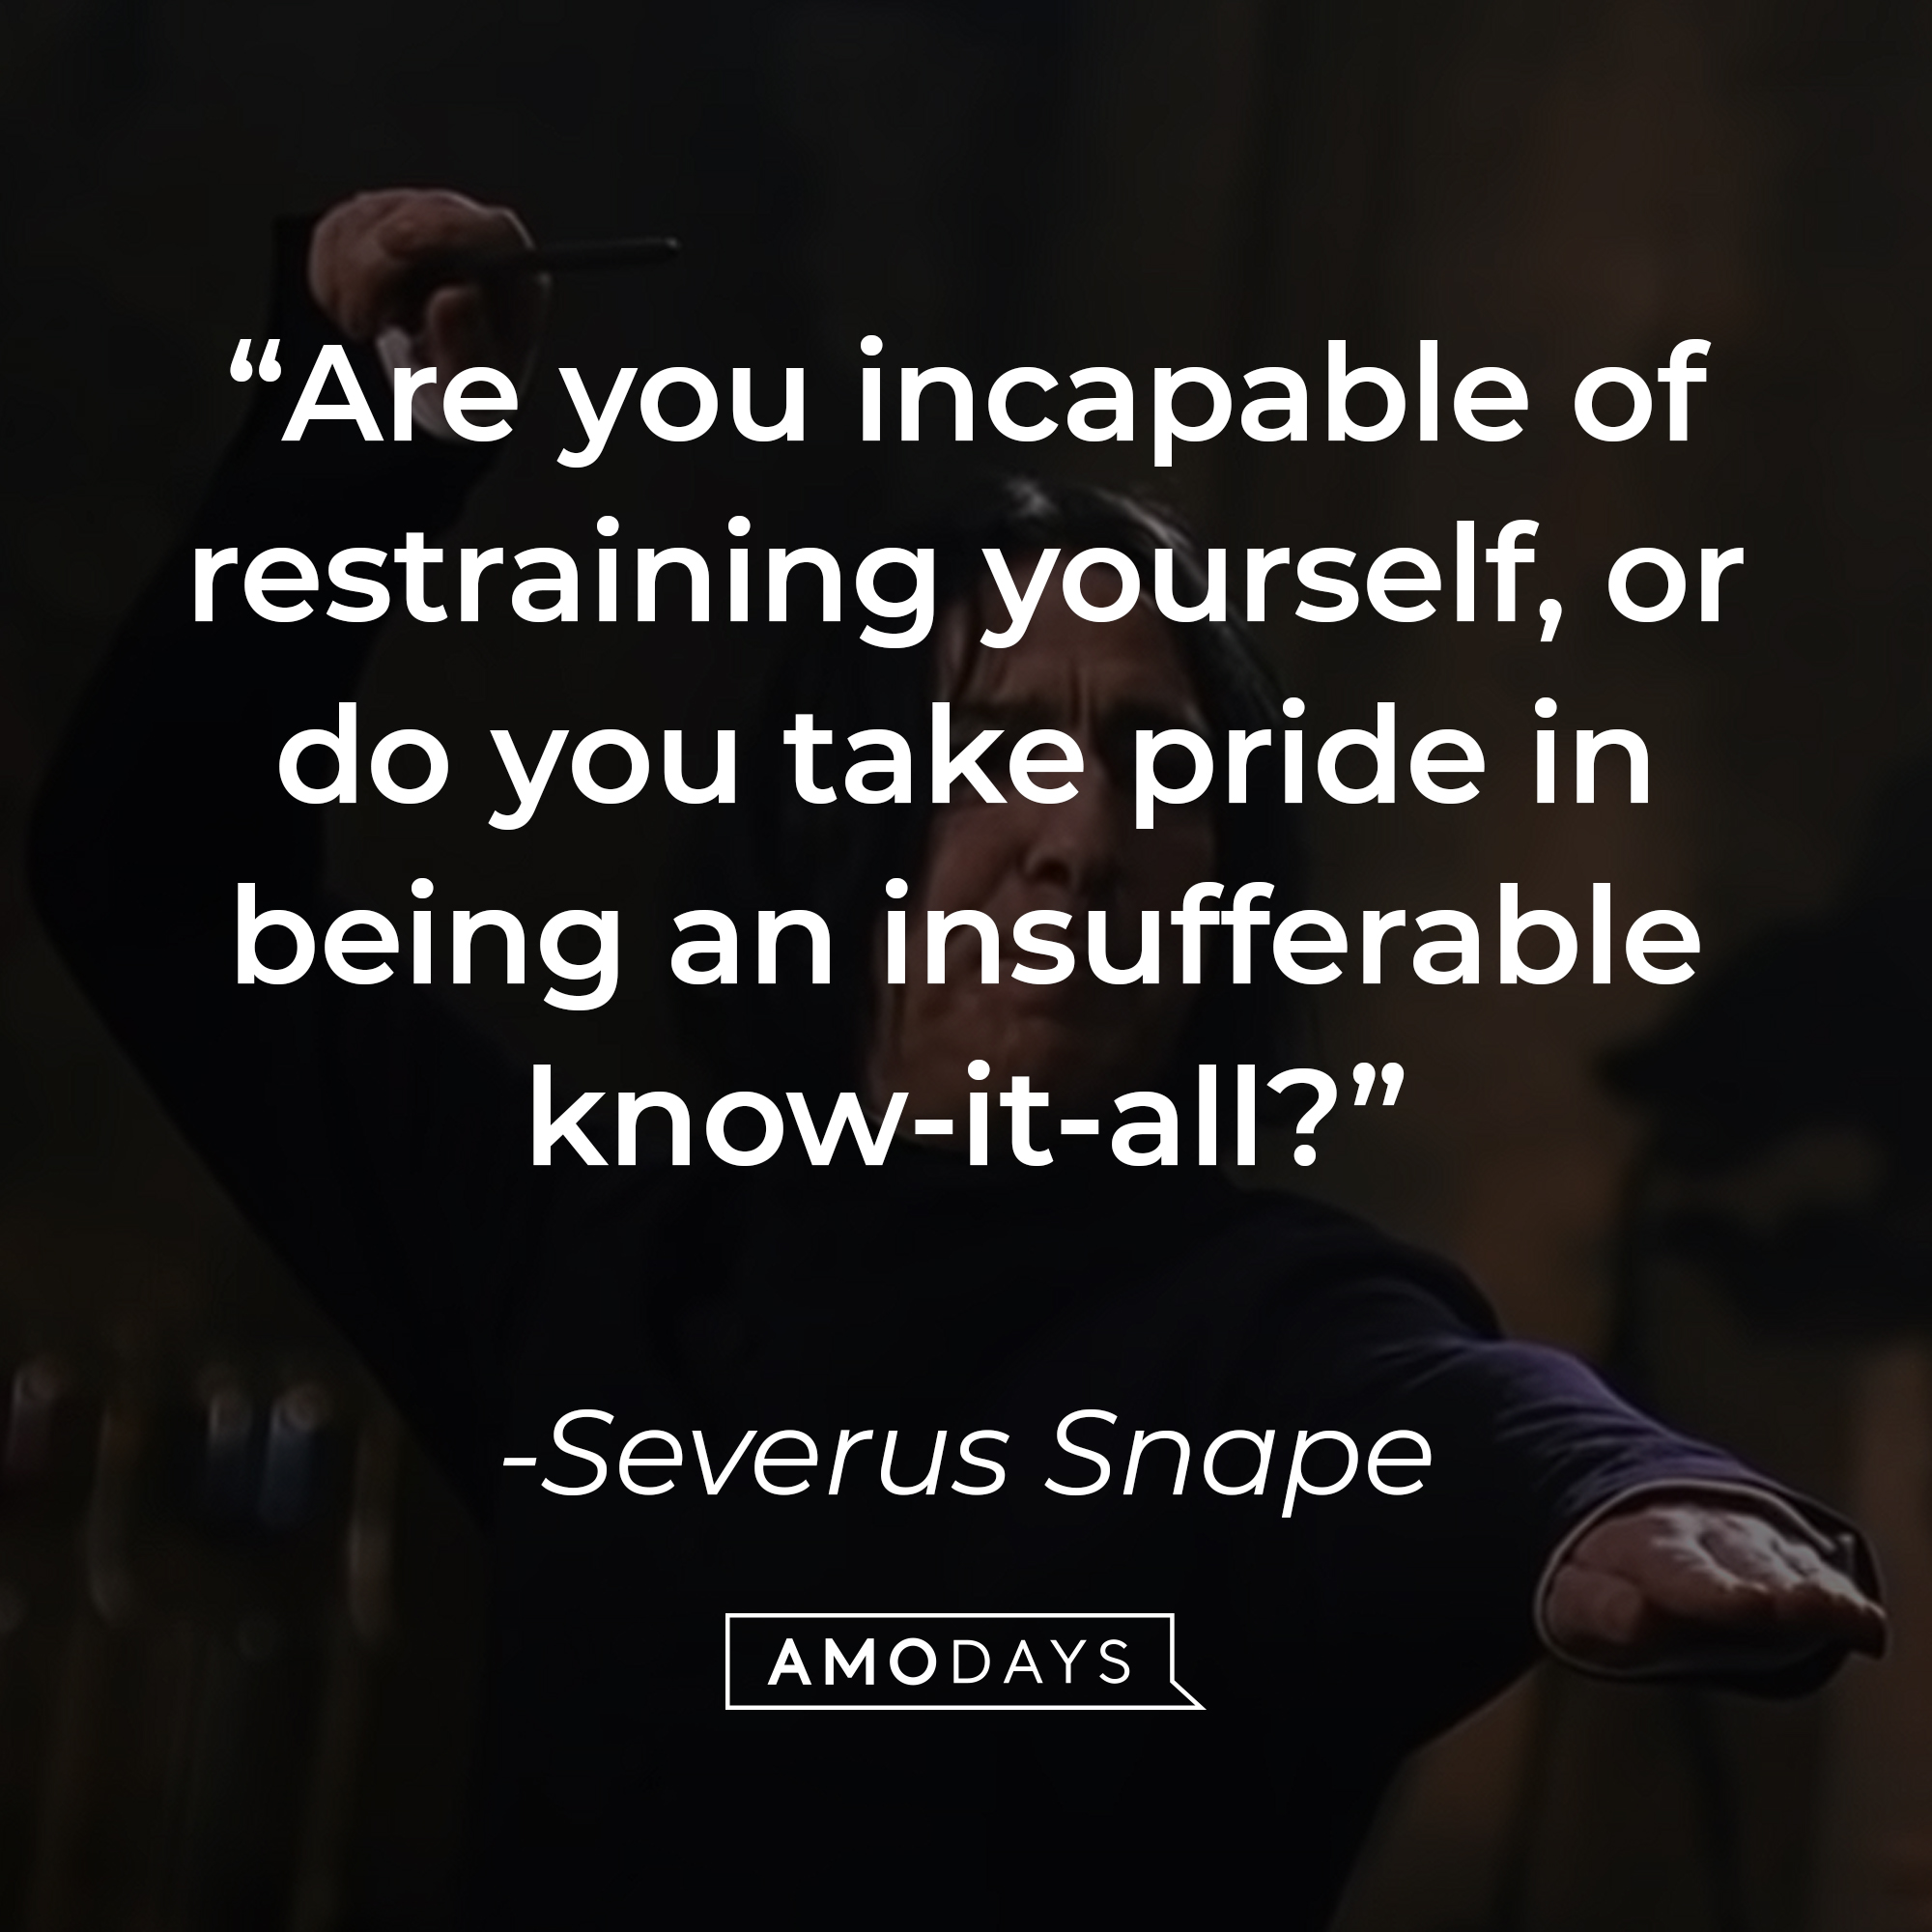 Severus Snape's quote: "Are you incapable of restraining yourself, or do you take pride in being an insufferable know-it-all?" | Source: YouTube/harrypotter